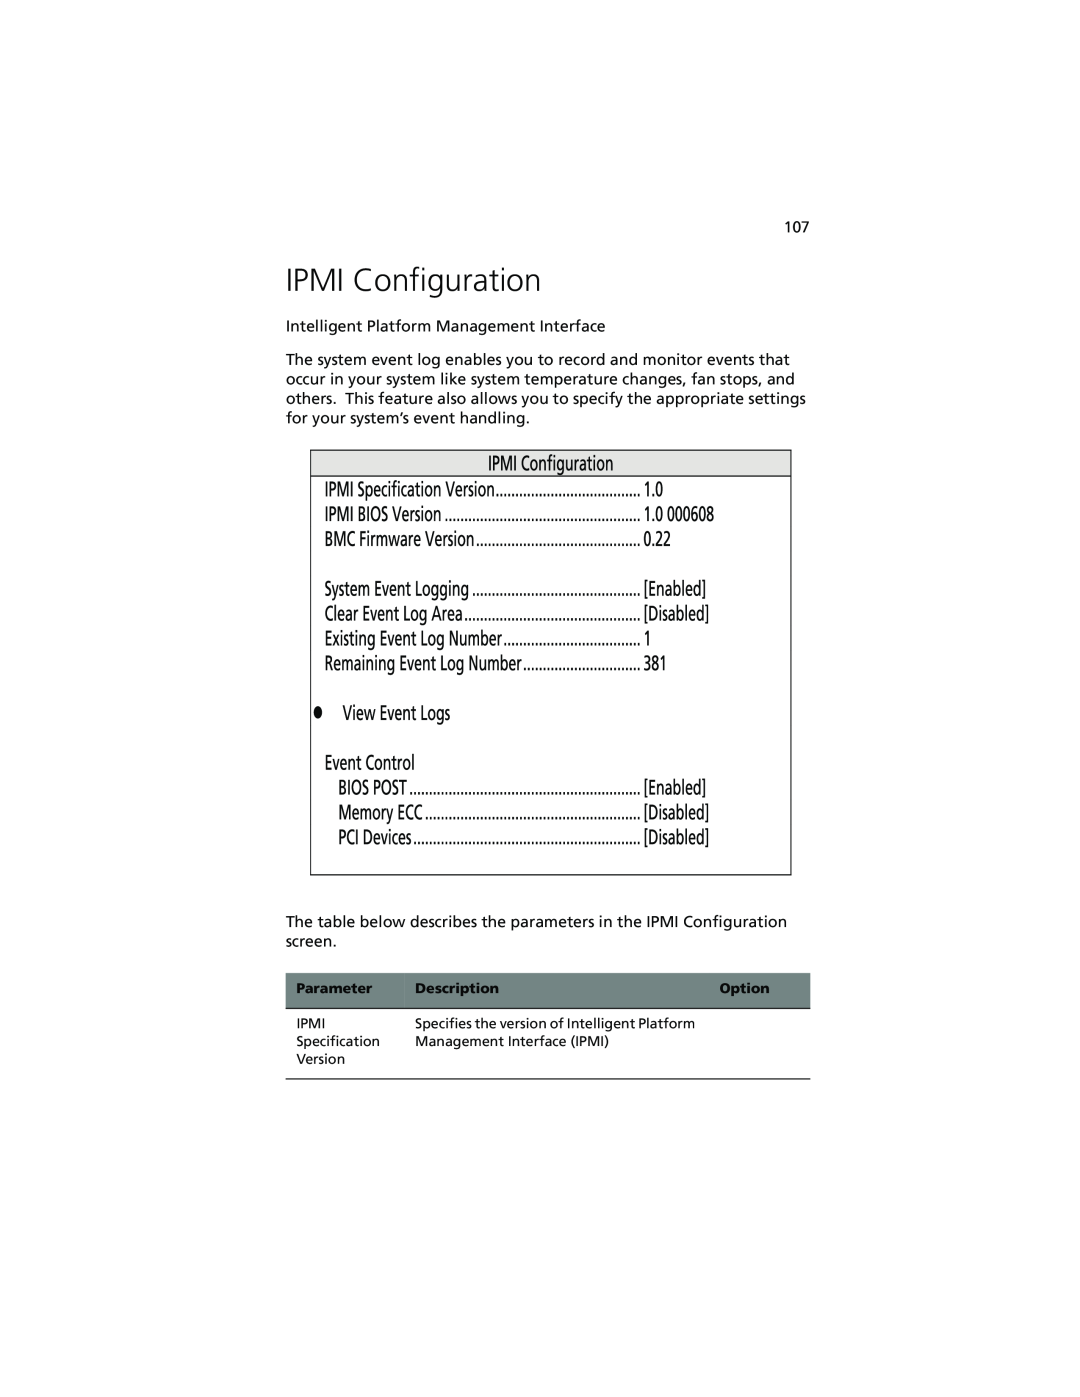 Acer Altos G610 manual IPMI Configuration, Ipmi, Specifies the version of Intelligent Platform, Specification, Version 